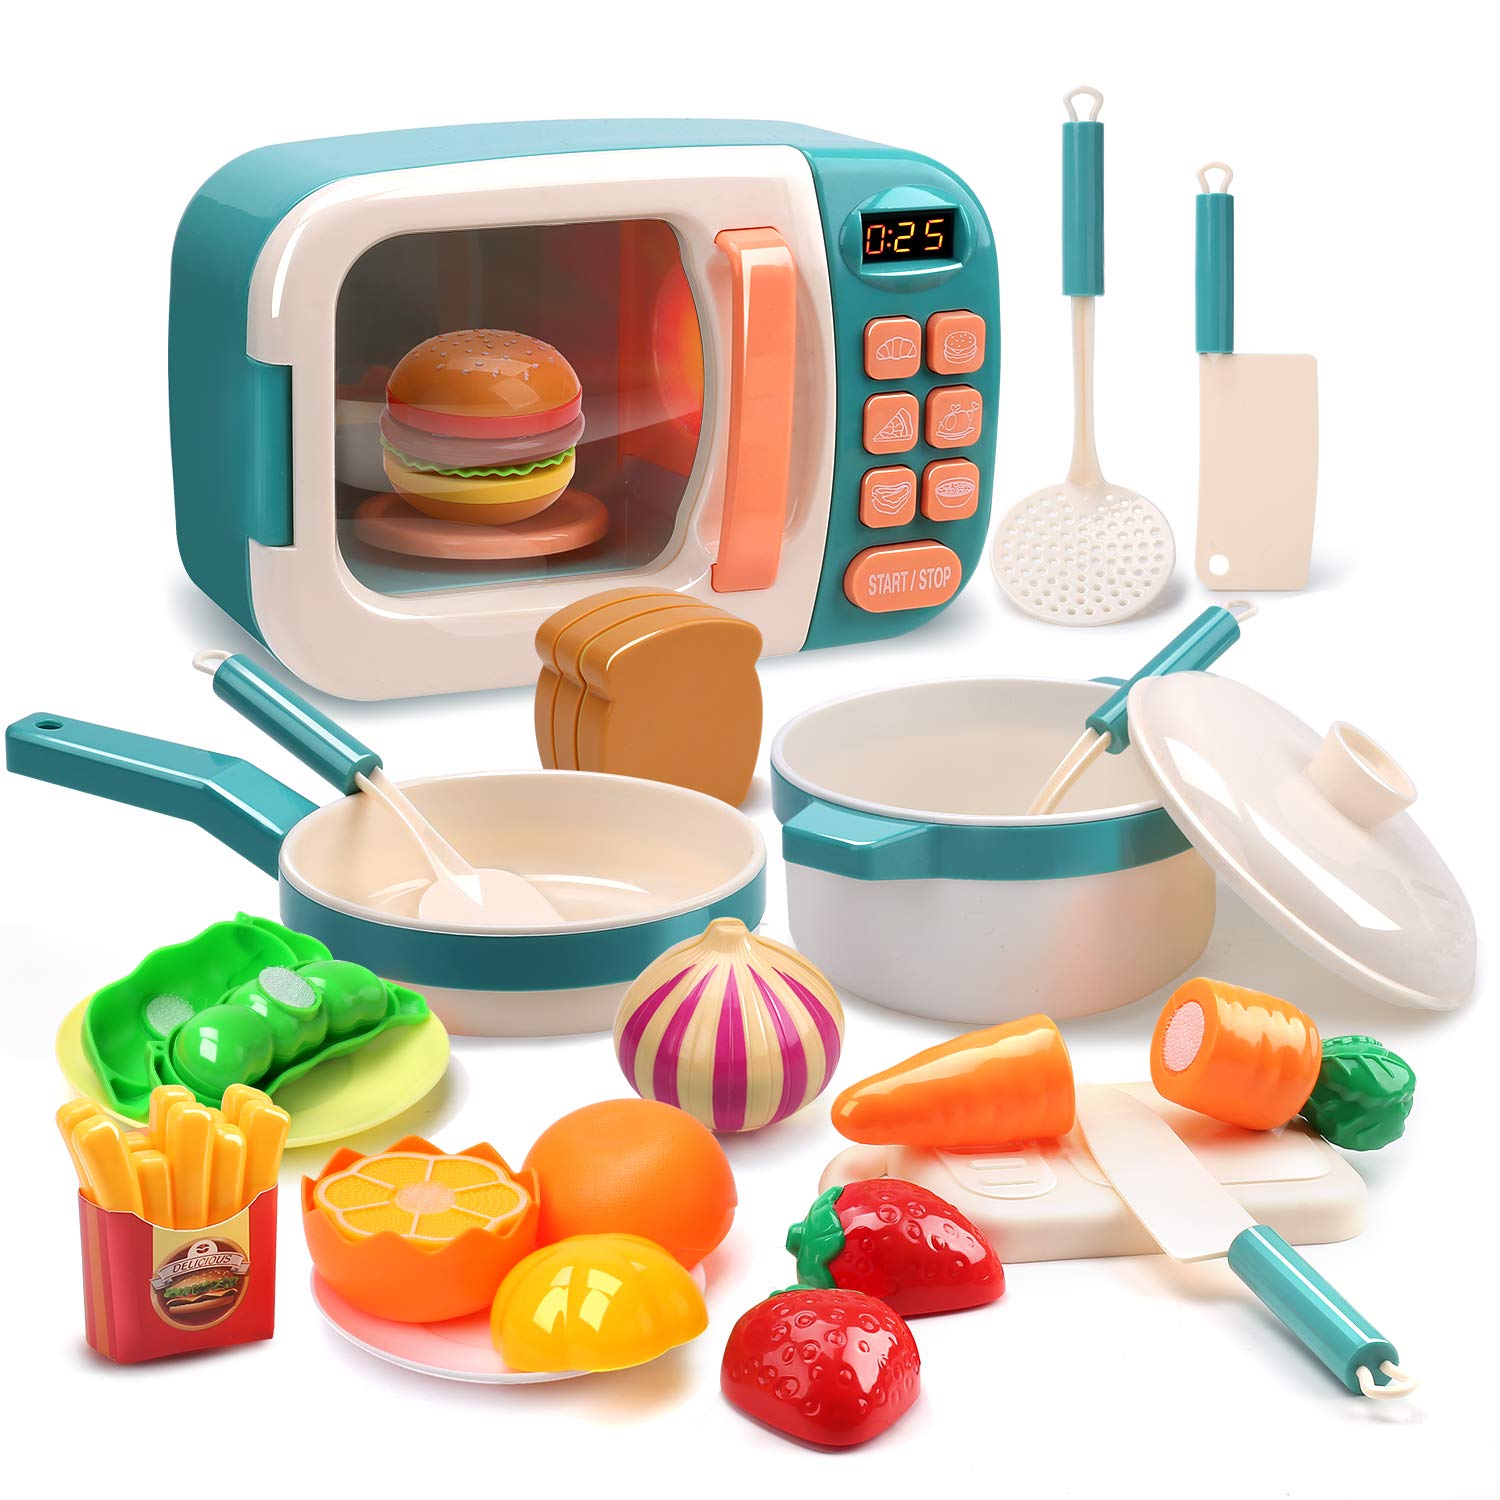 Cute Stone Microwave Toys Kitchen  Play Set  14 49 at Amazon 